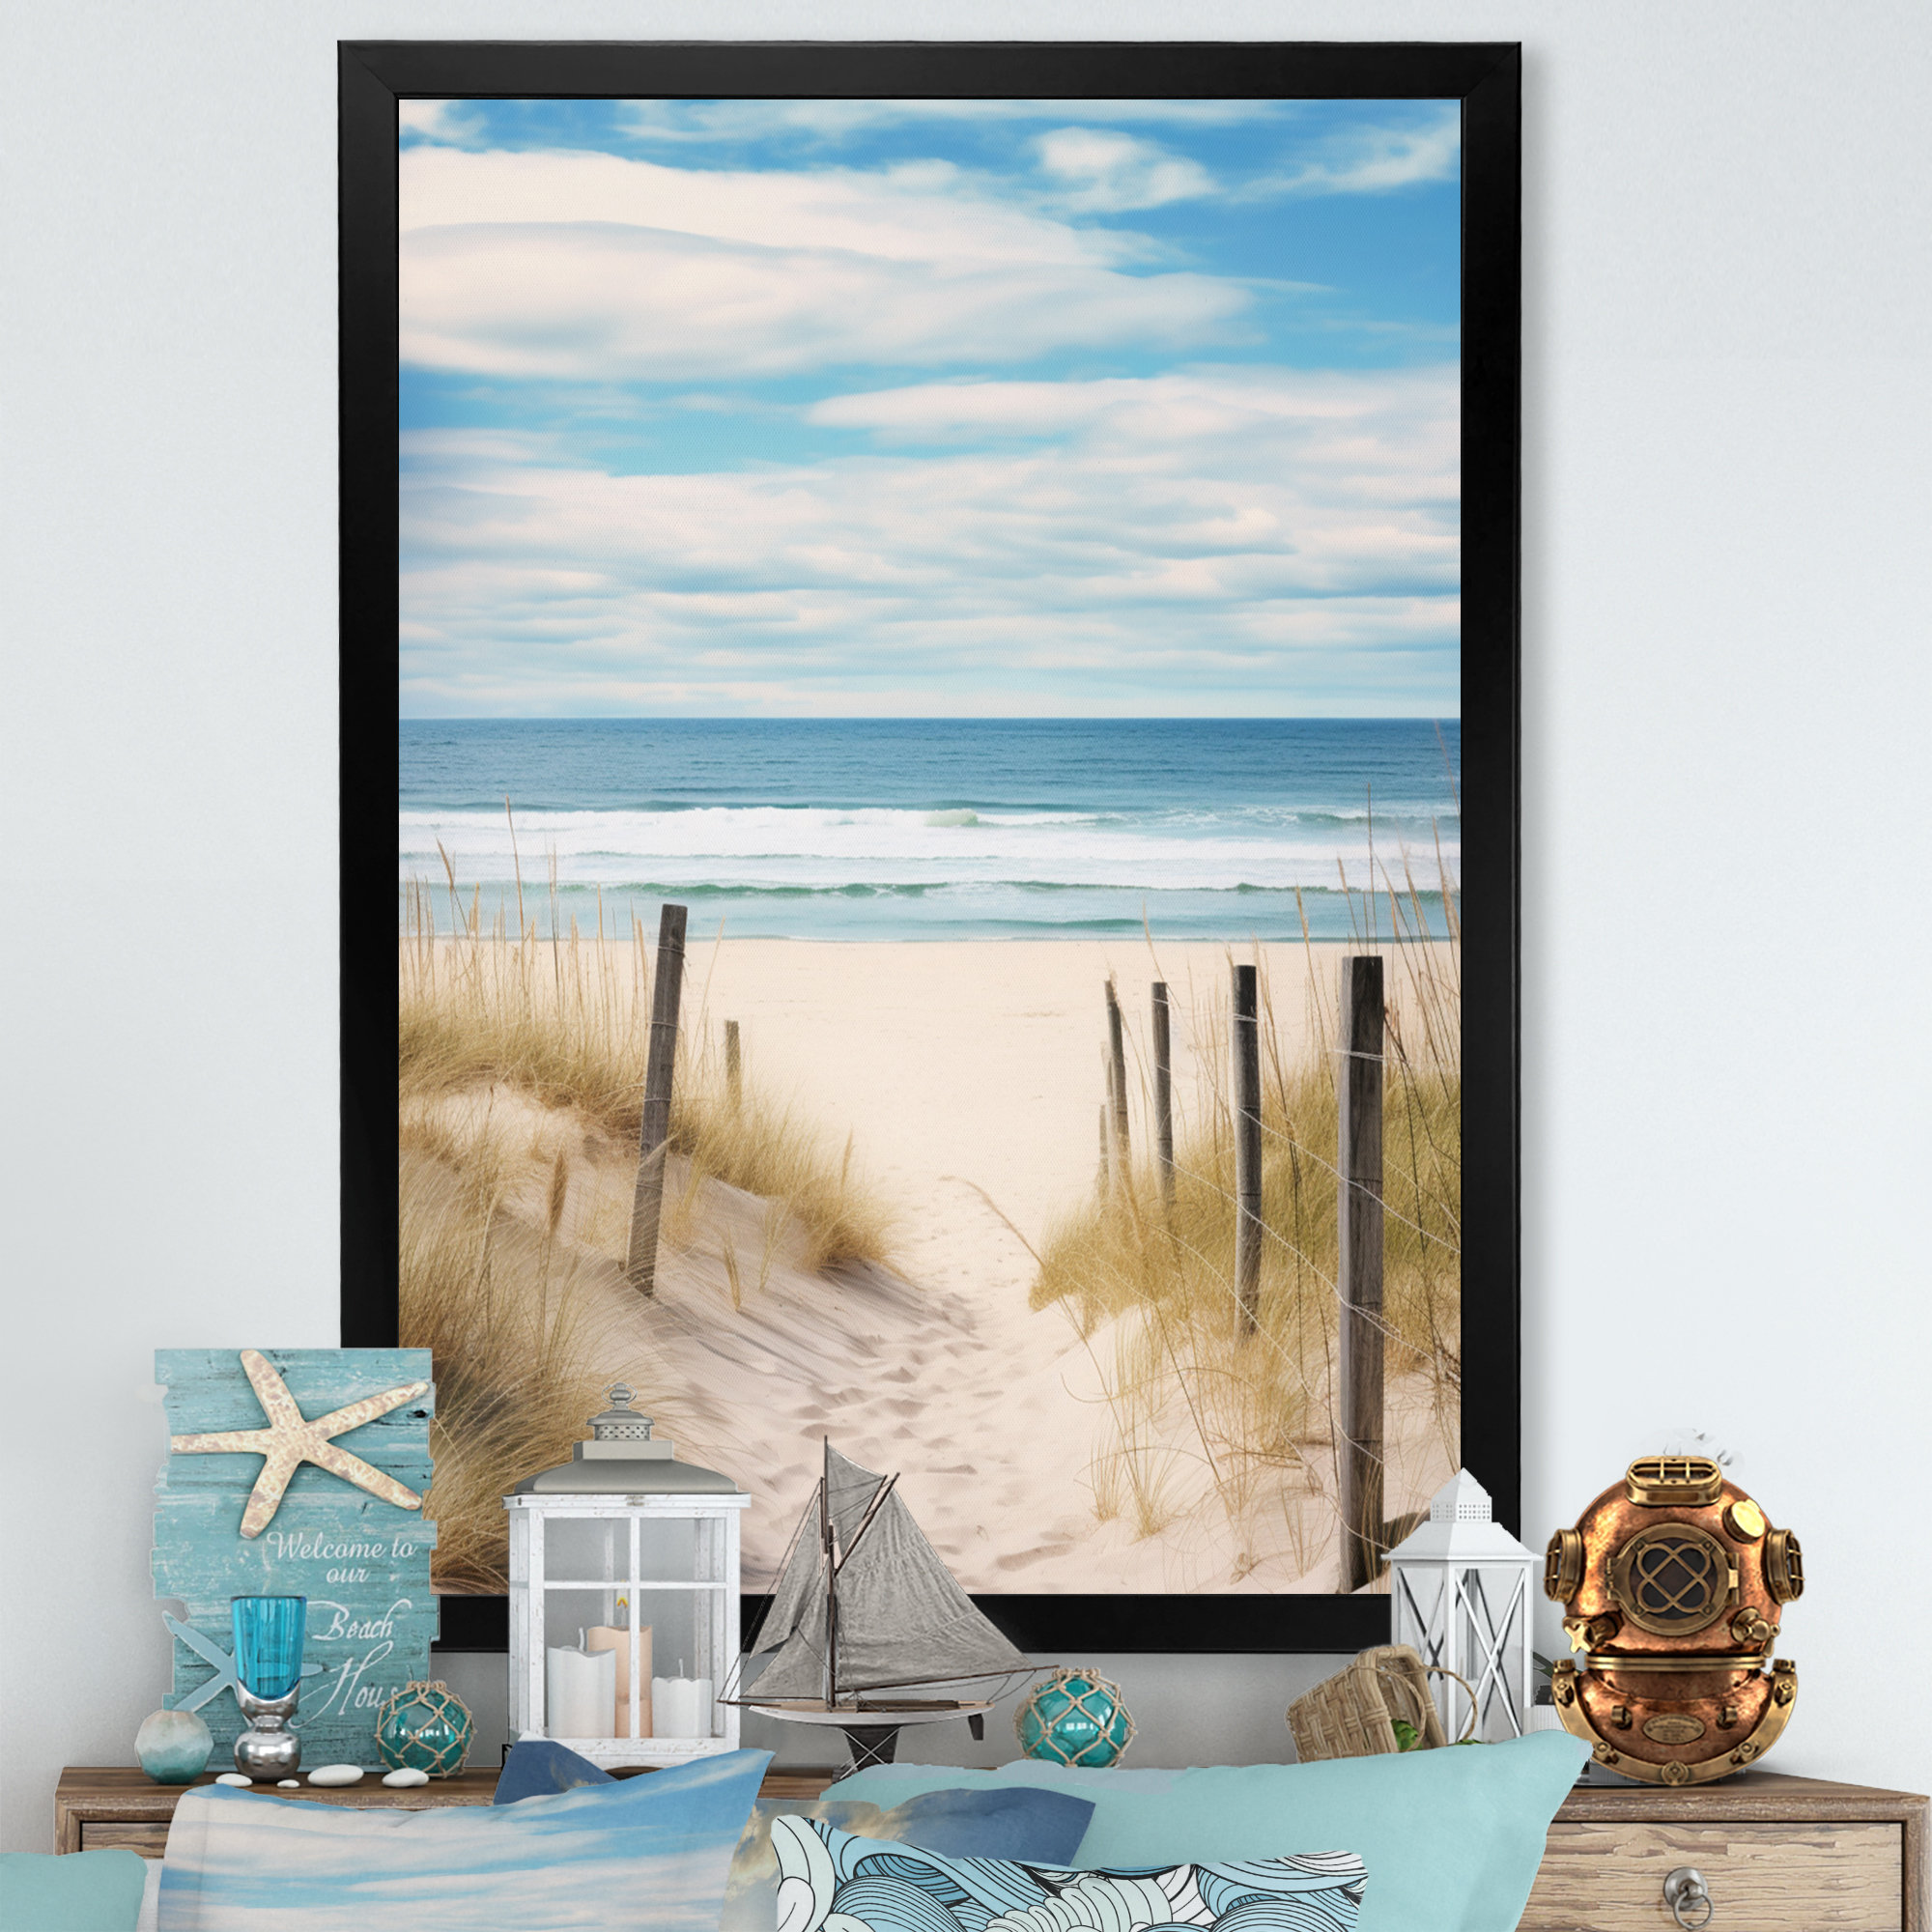 Dovecove Beach Canvas Wall Art Decor Framed On Canvas 2 Pieces Painting